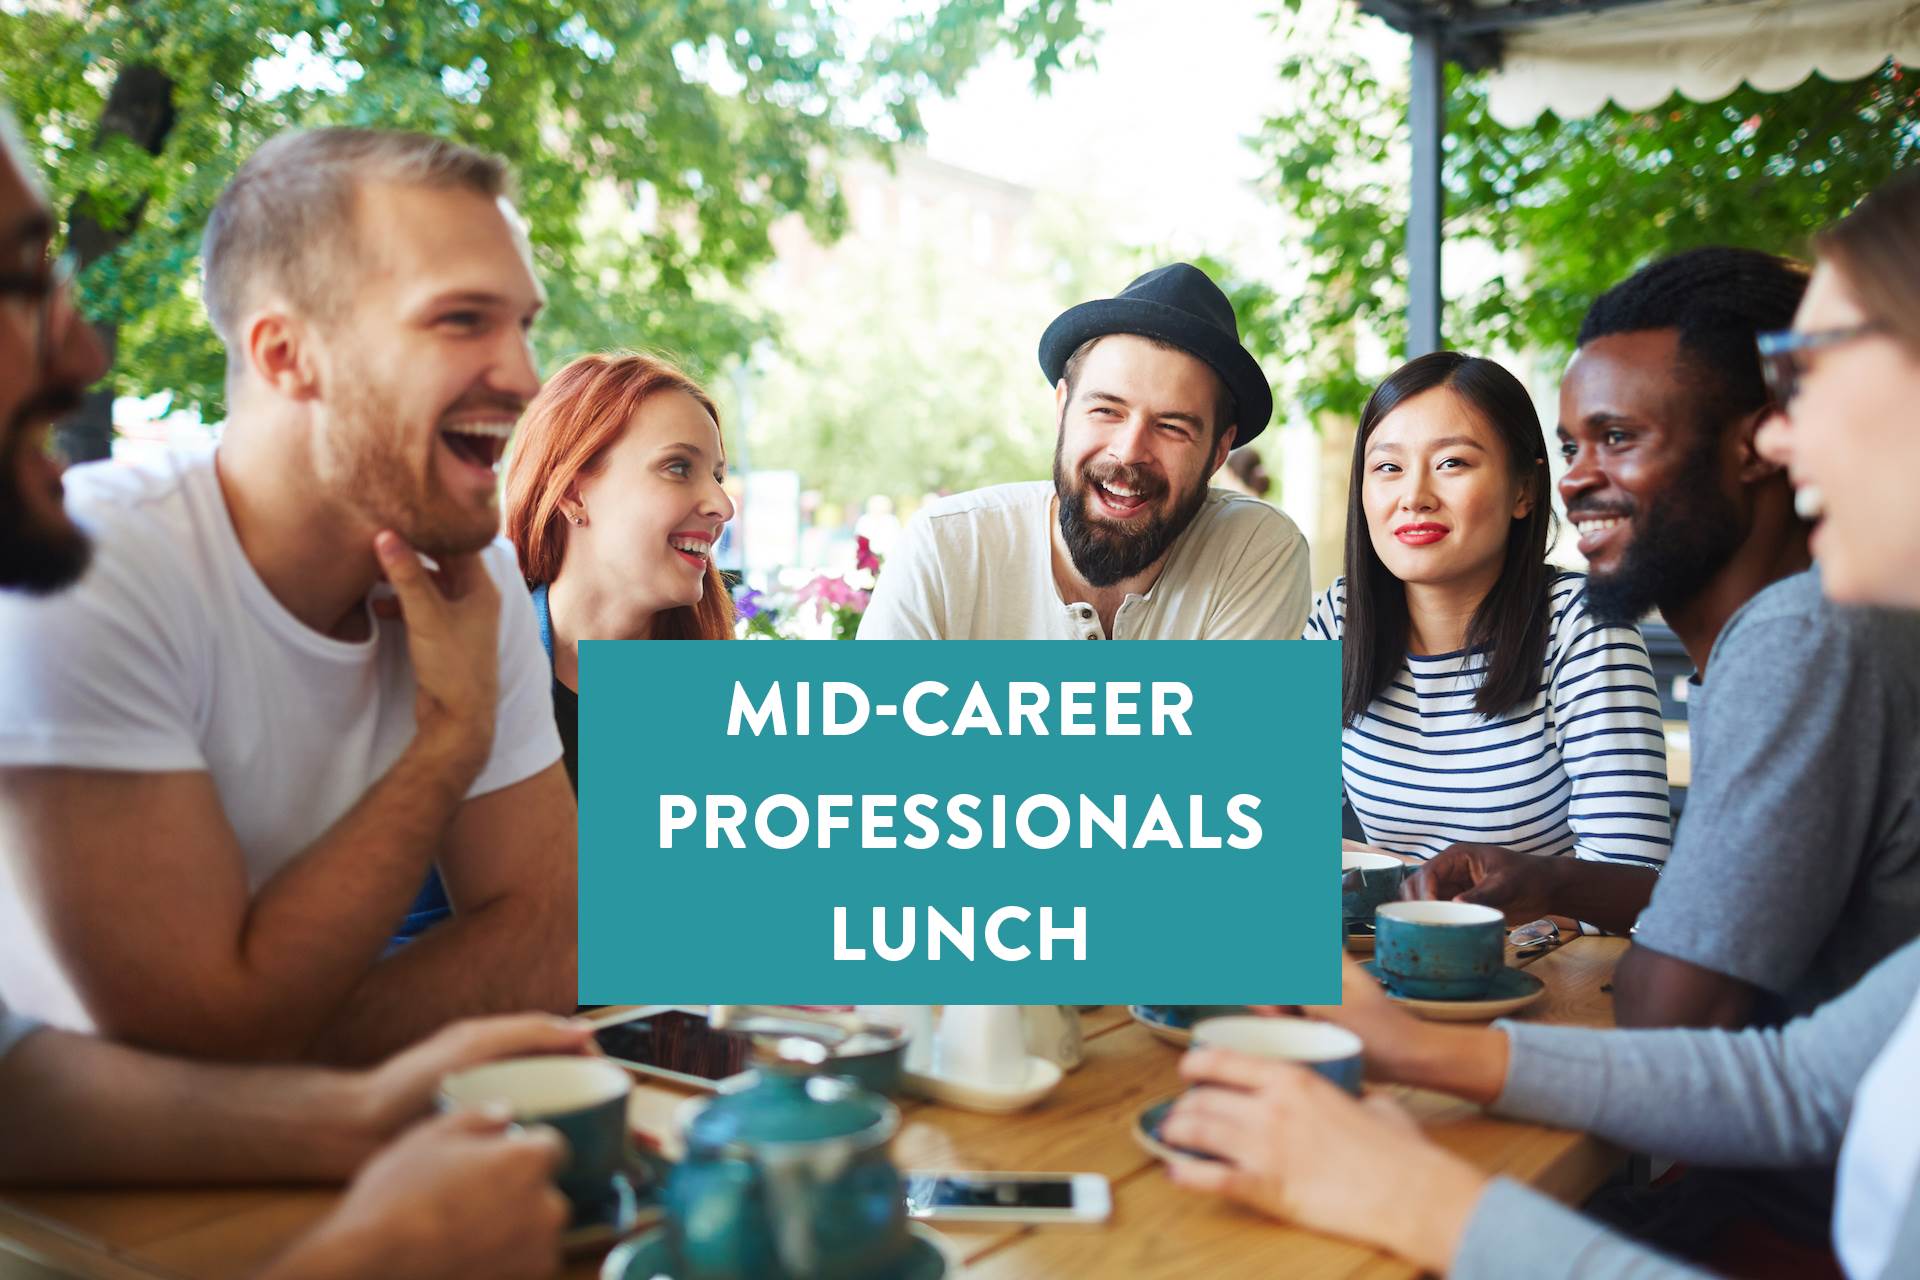 Link to Mid-Career Professionals detail page